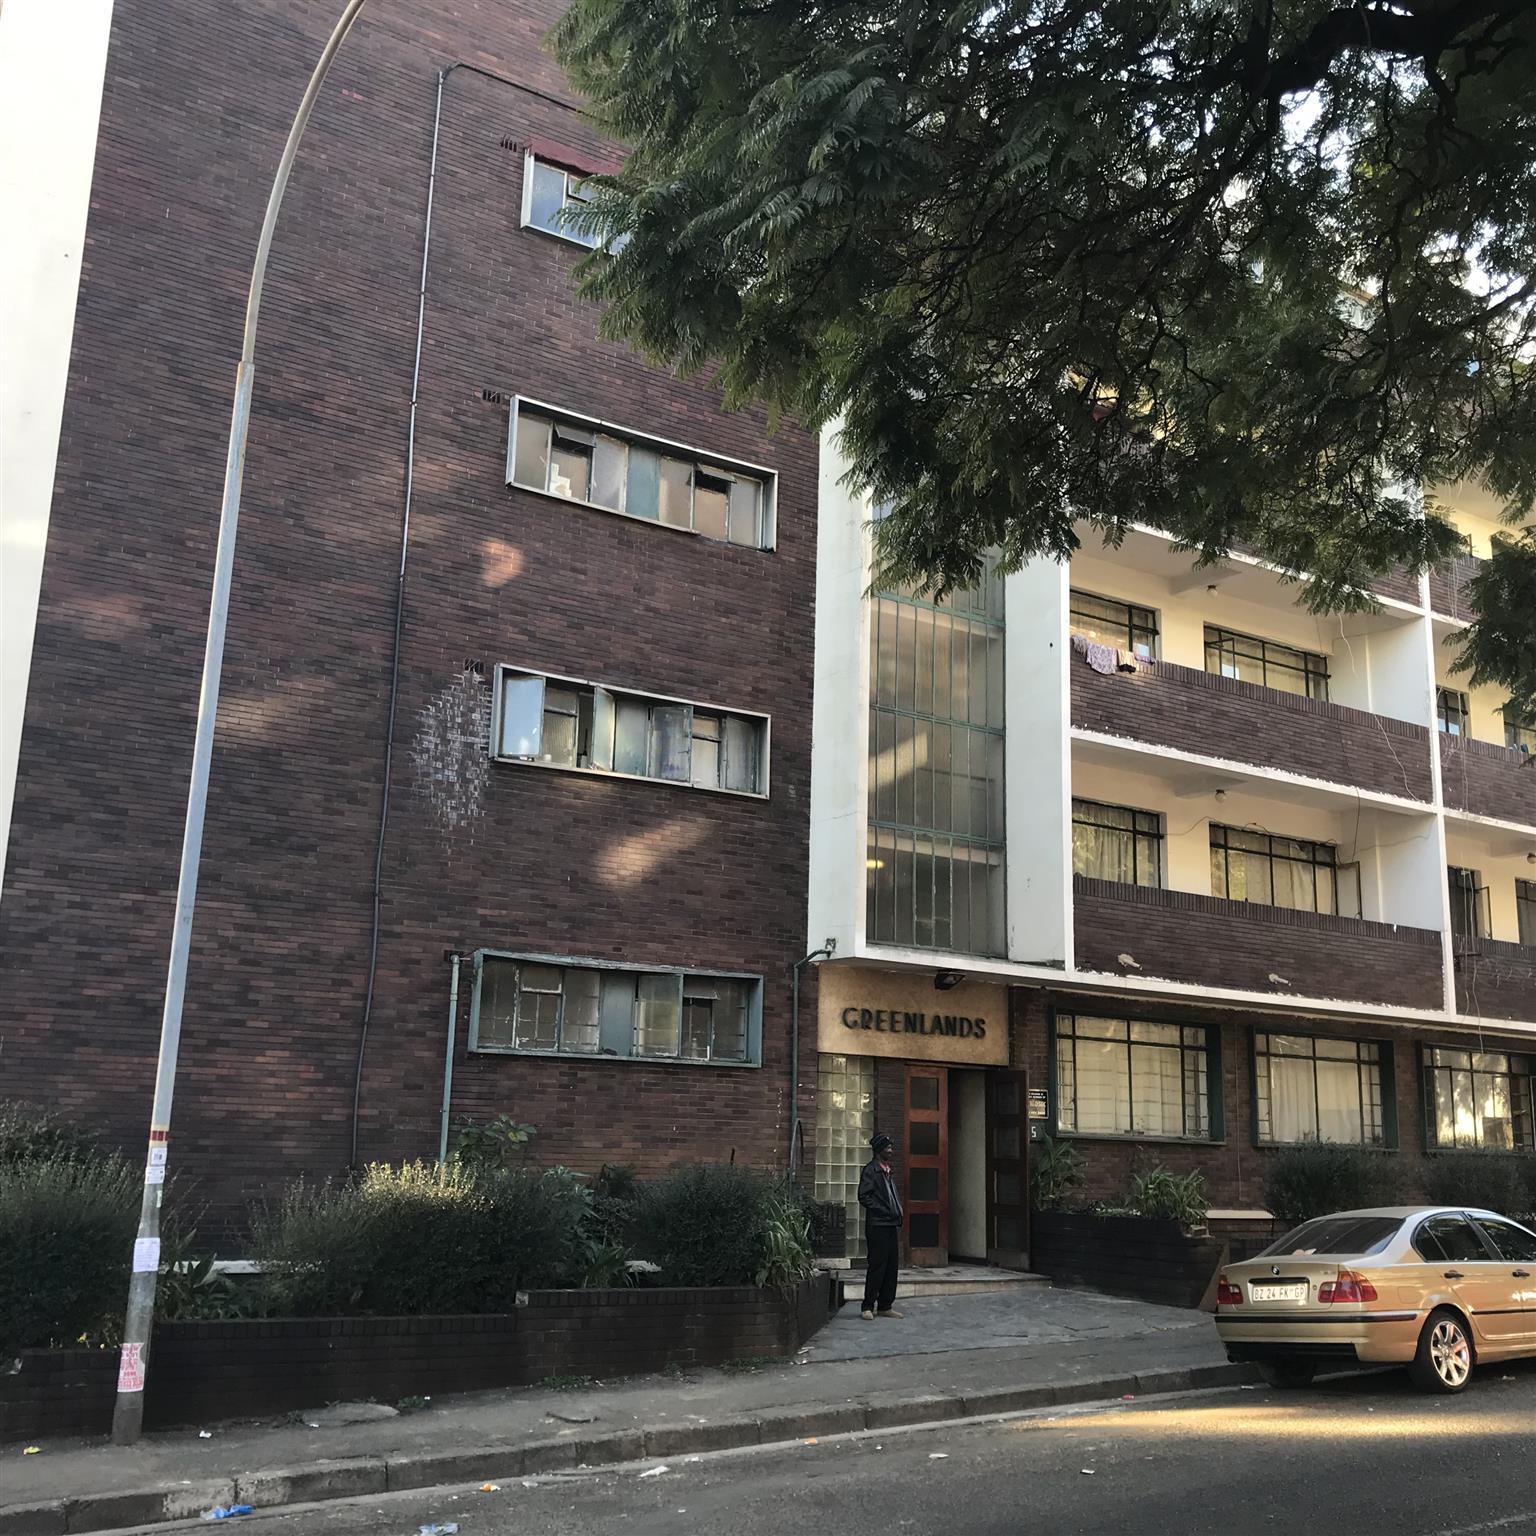 Newly renovated flats to rent in CBD